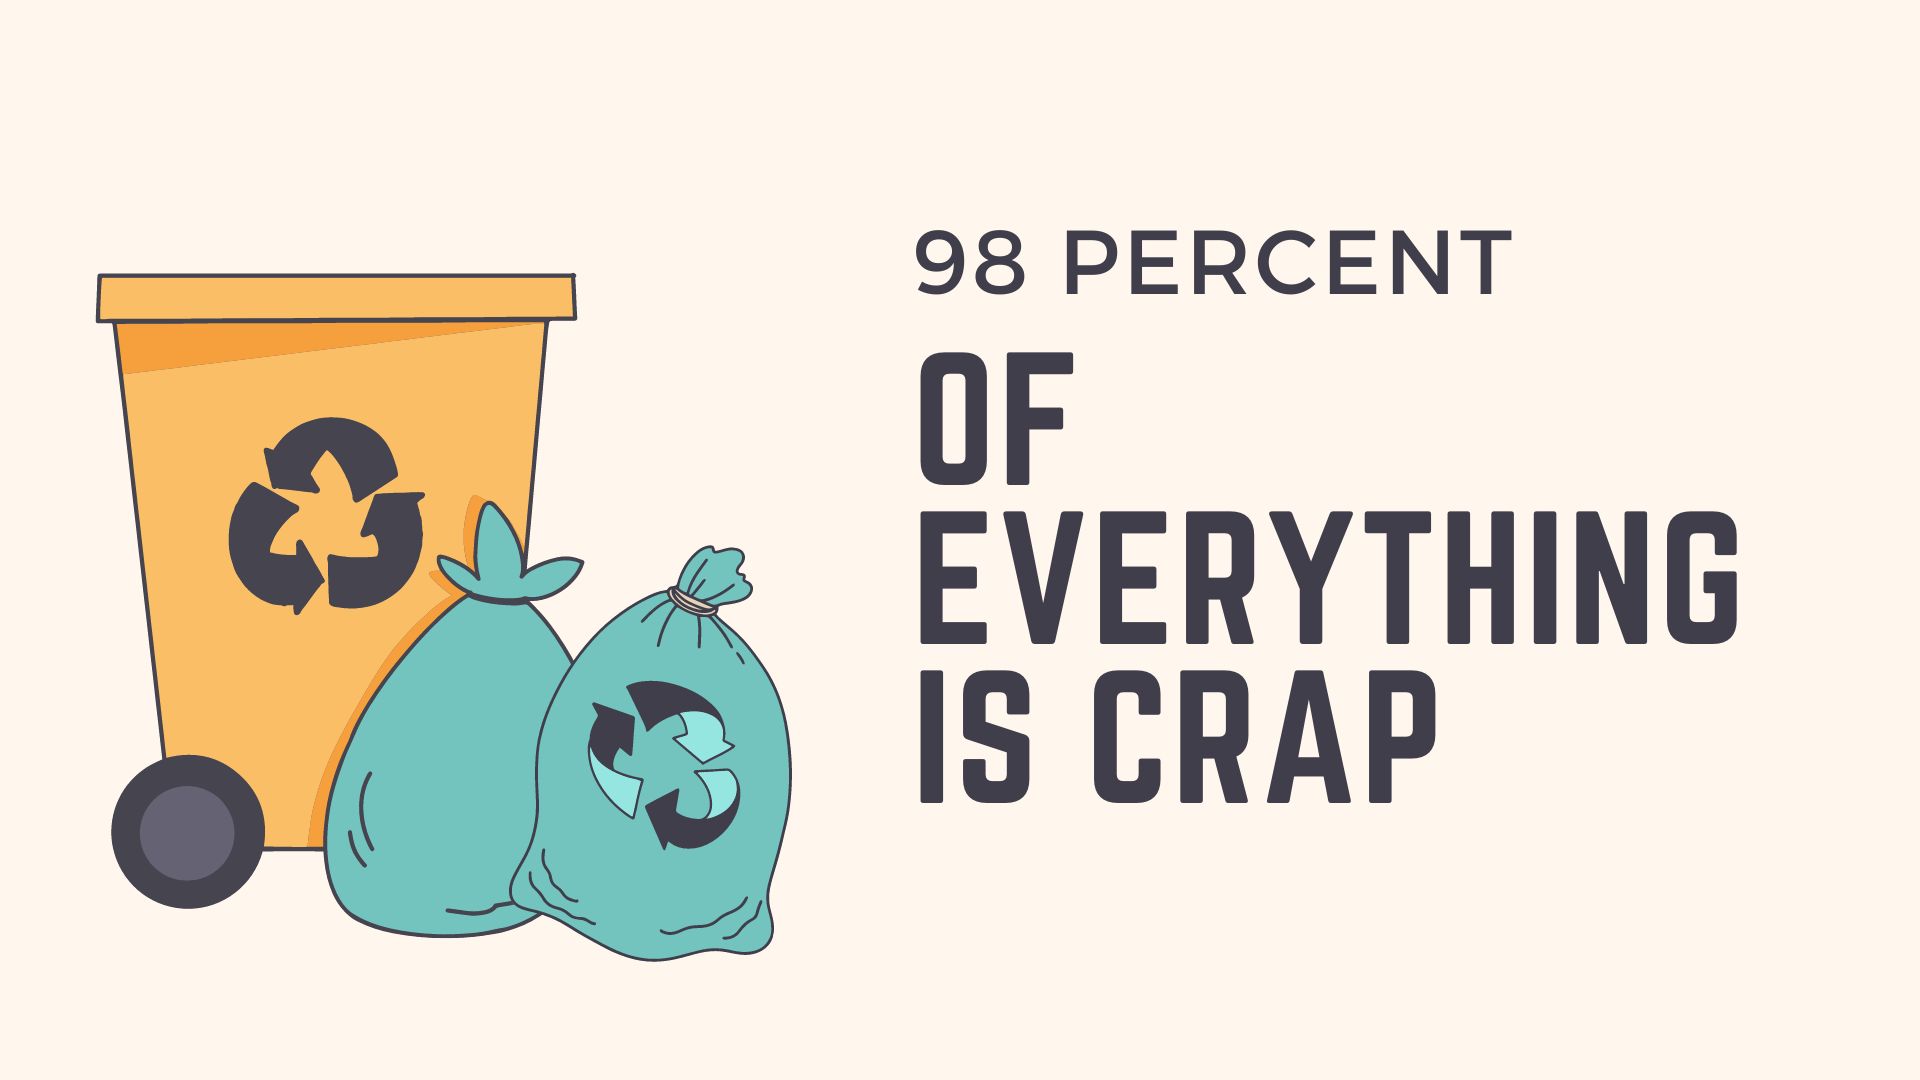 98 percent of everything is crap